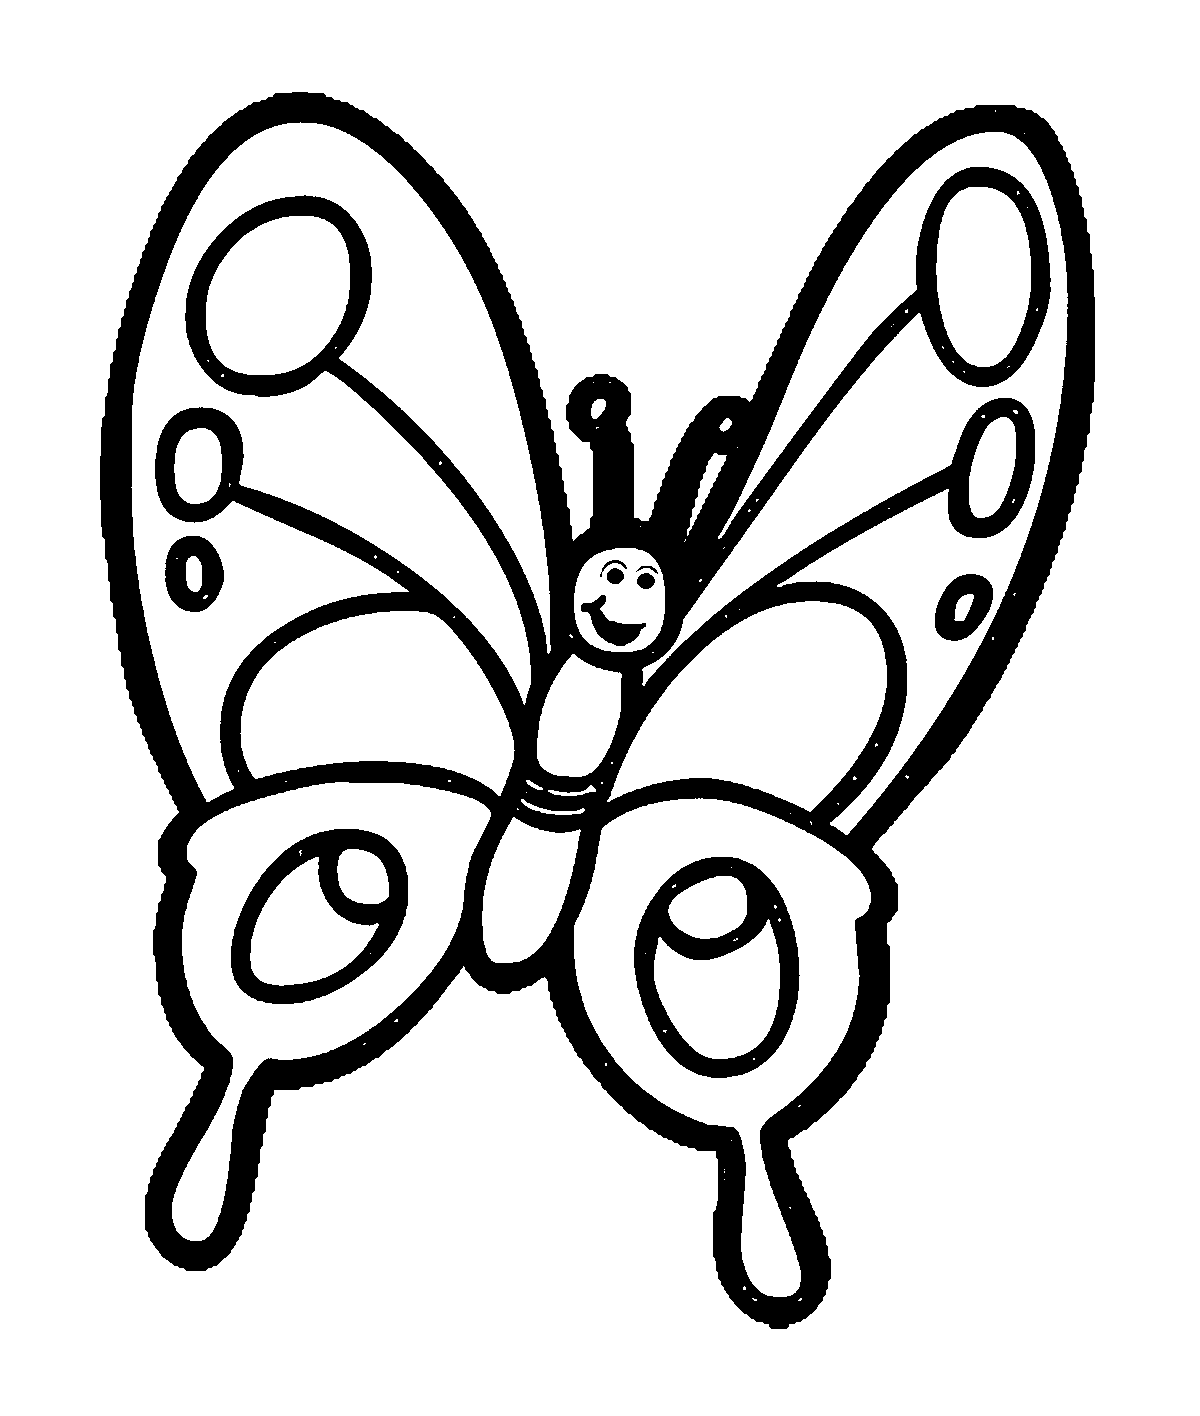 Butterfly black and white cartoonbutterflyloring page format gif